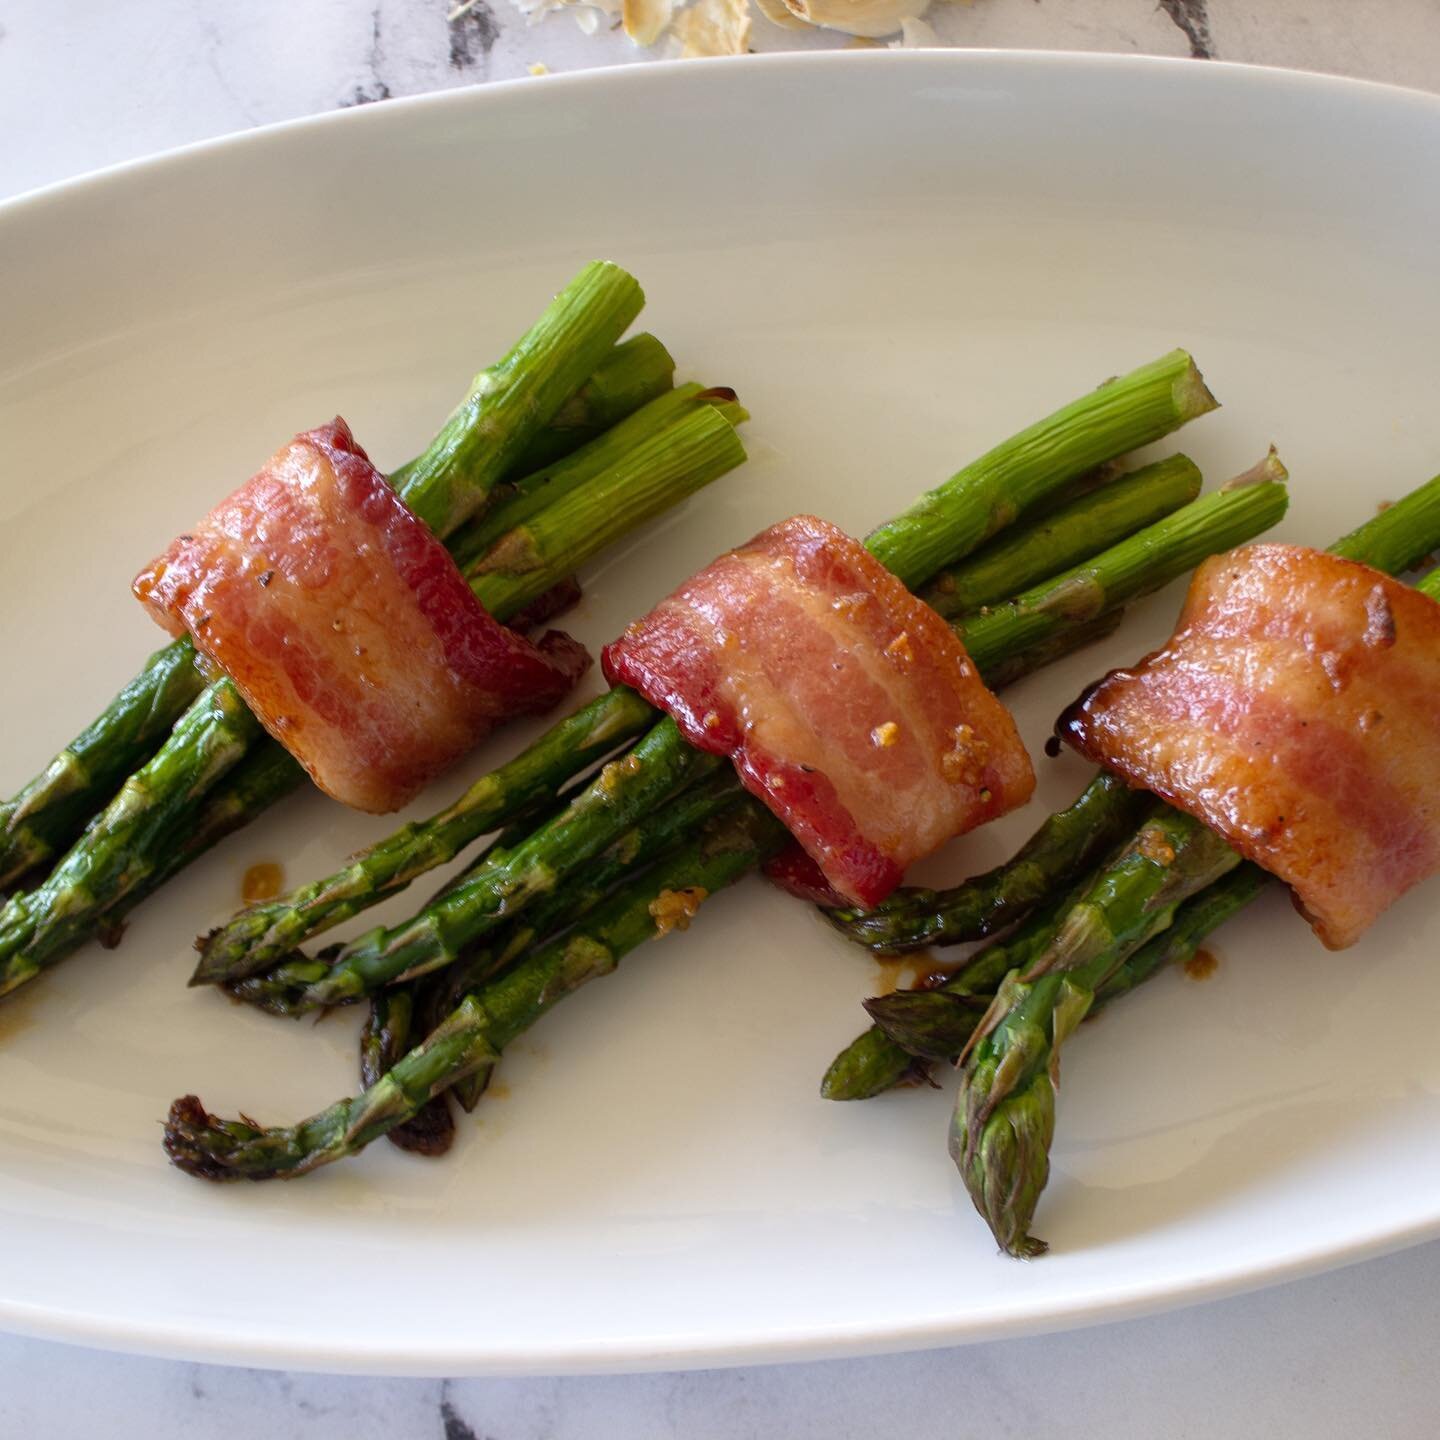 Bacon wrapped asparagus bundles &bull; this recipe is in the most recent @herlifemagazine issue!

Ingredients:

2 pounds fresh asparagus, ends trimmed

12 slices bacon

1/2 cup light brown sugar

1/2 cup (1 stick) butter

1 tablespoon soy sauce

1 cl